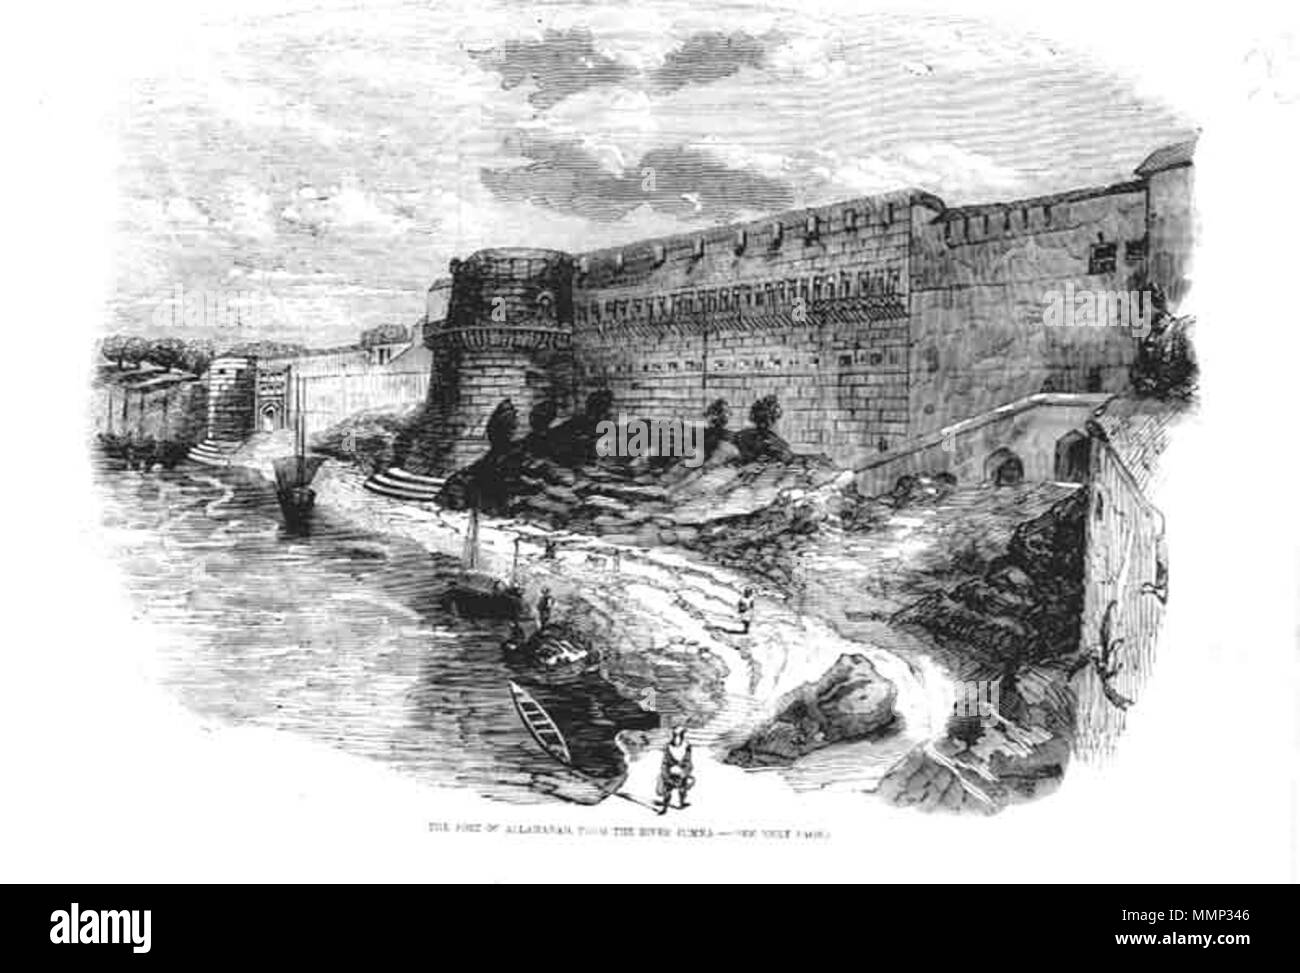 . English: Fort of Allahabad'*, 1857. Views from the ILLUSTRATED LONDON NEWS and The Graphic (some with later hand coloring, all from ebay auctions): 'Fort of Allahabad'*, 1857   . between 1846 and 1899. Views from the ILLUSTRATED LONDON NEWS and The Graphic (some with later hand coloring, all from ebay auctions): 38 Allahabadfort Stock Photo